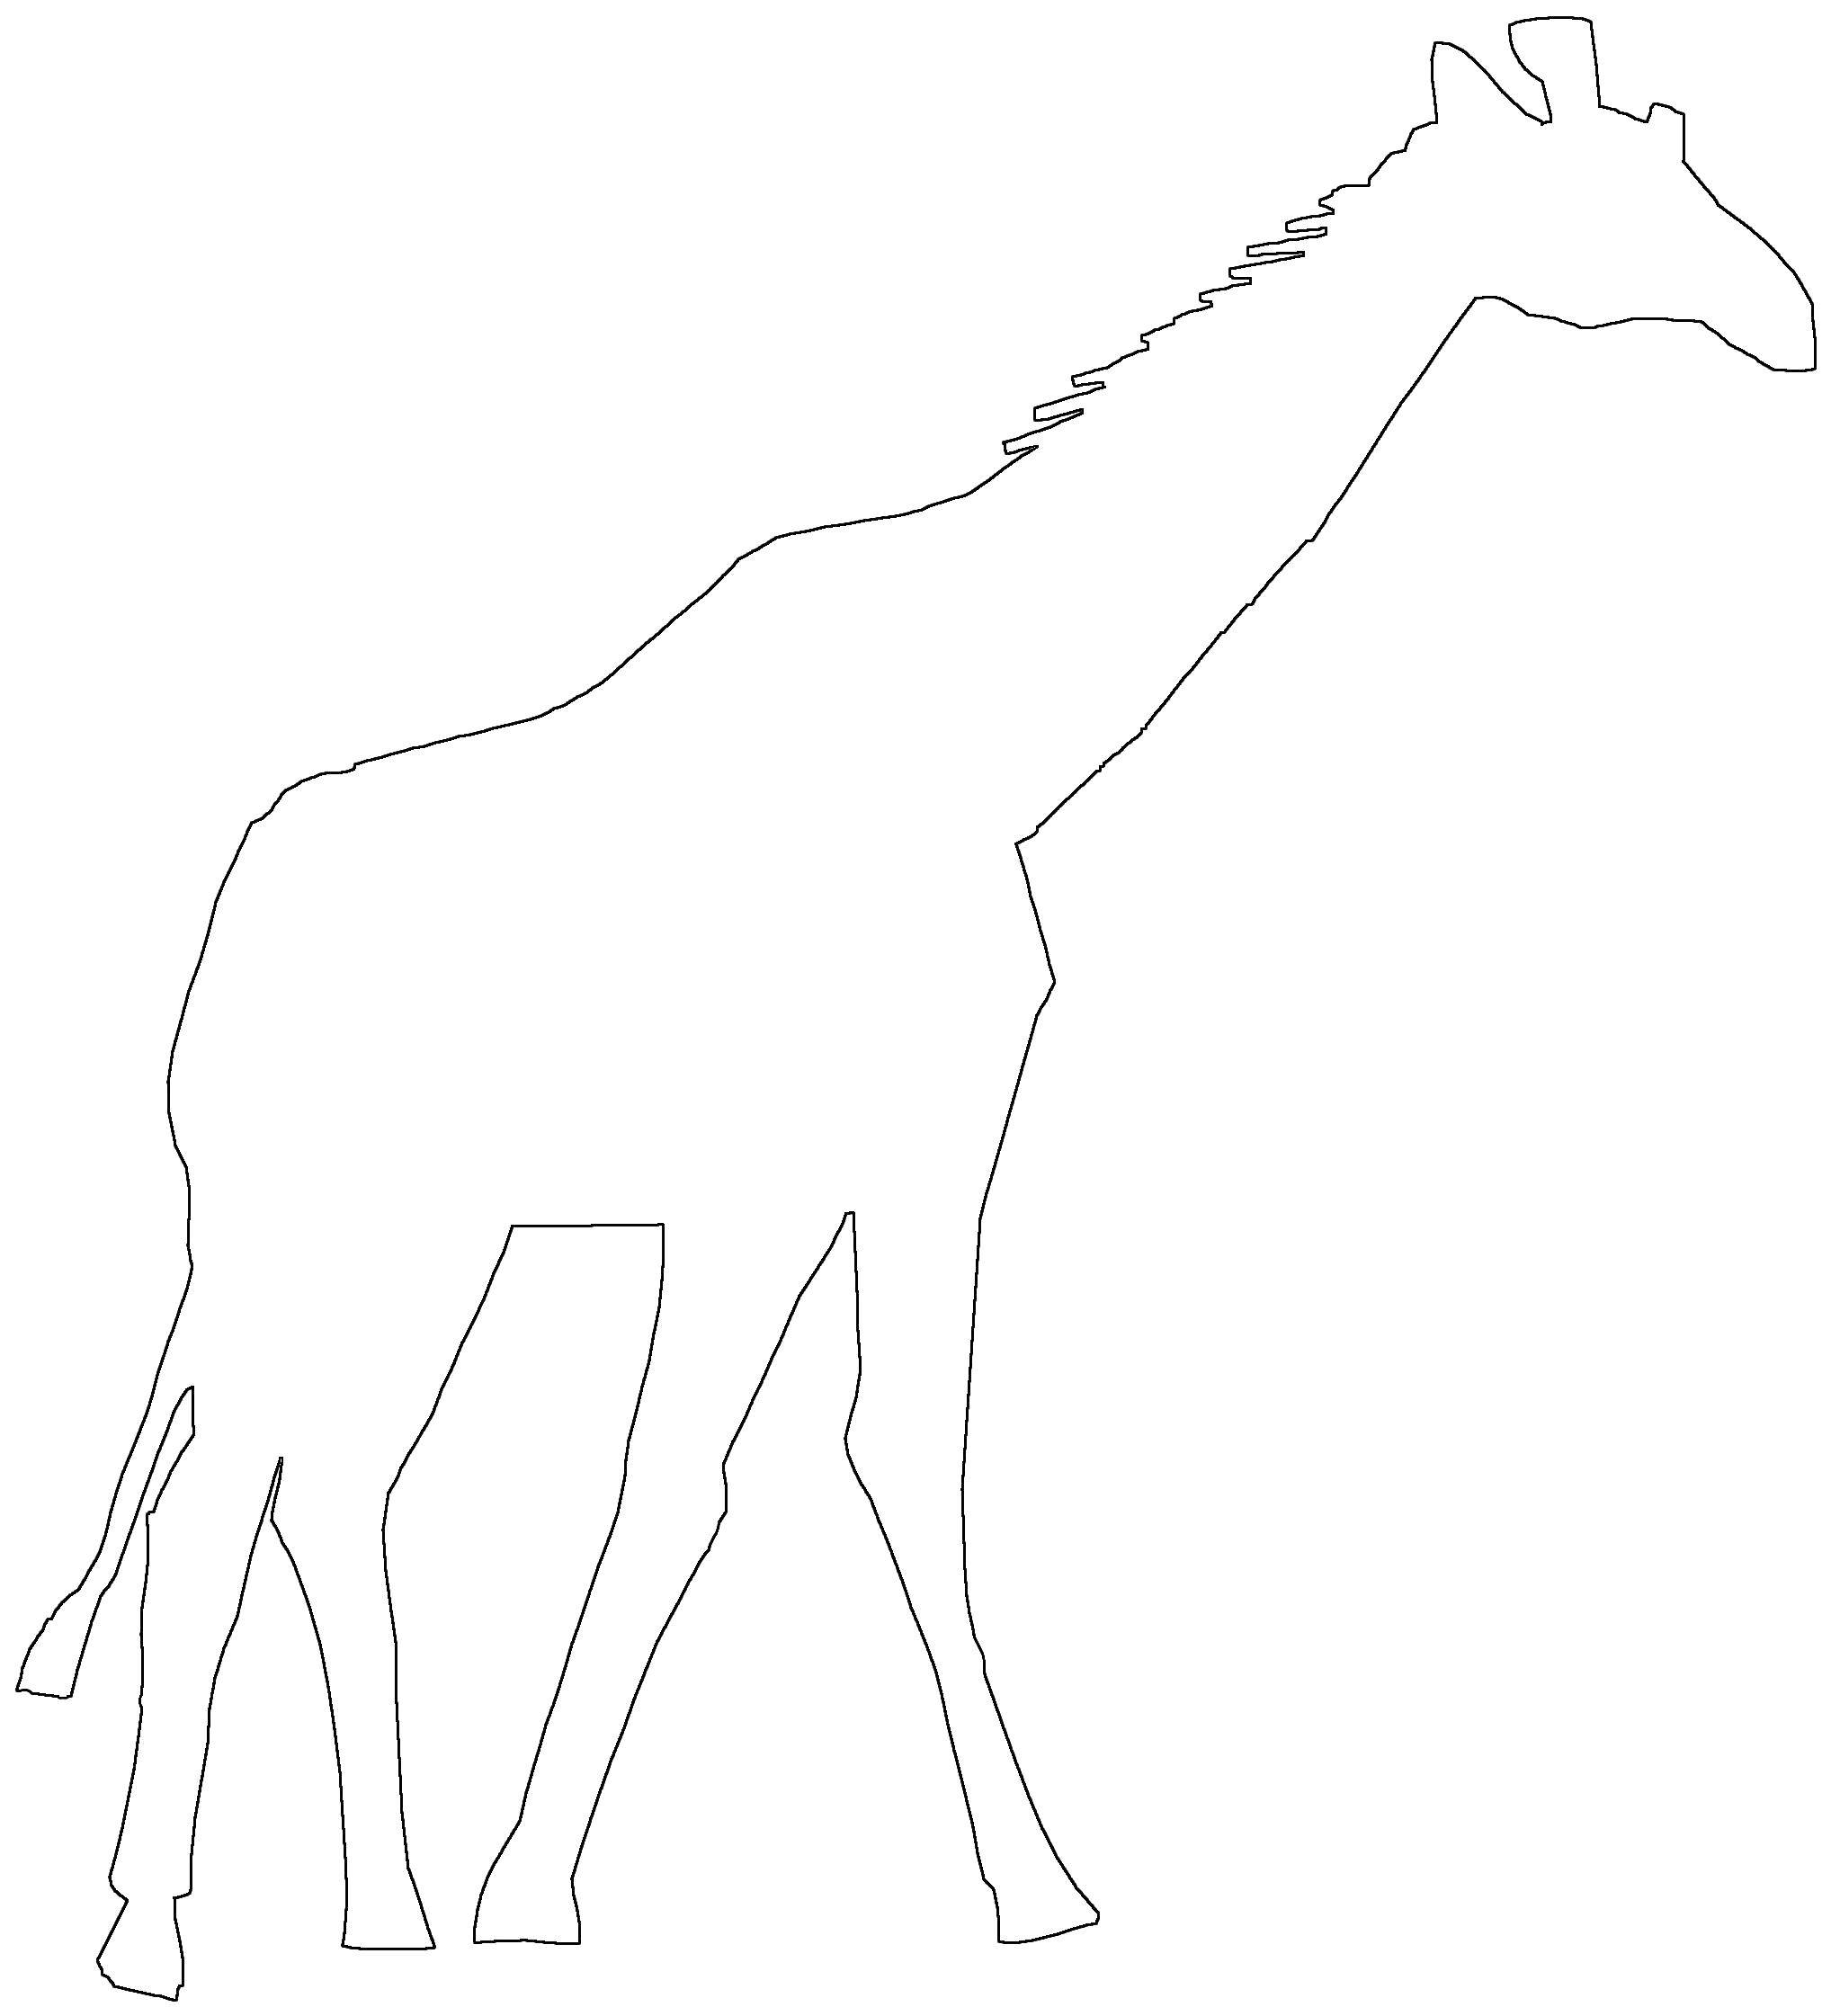 Coloring Giraffe. Category The outline of a giraffe for cutting. Tags:  Animals, giraffe.